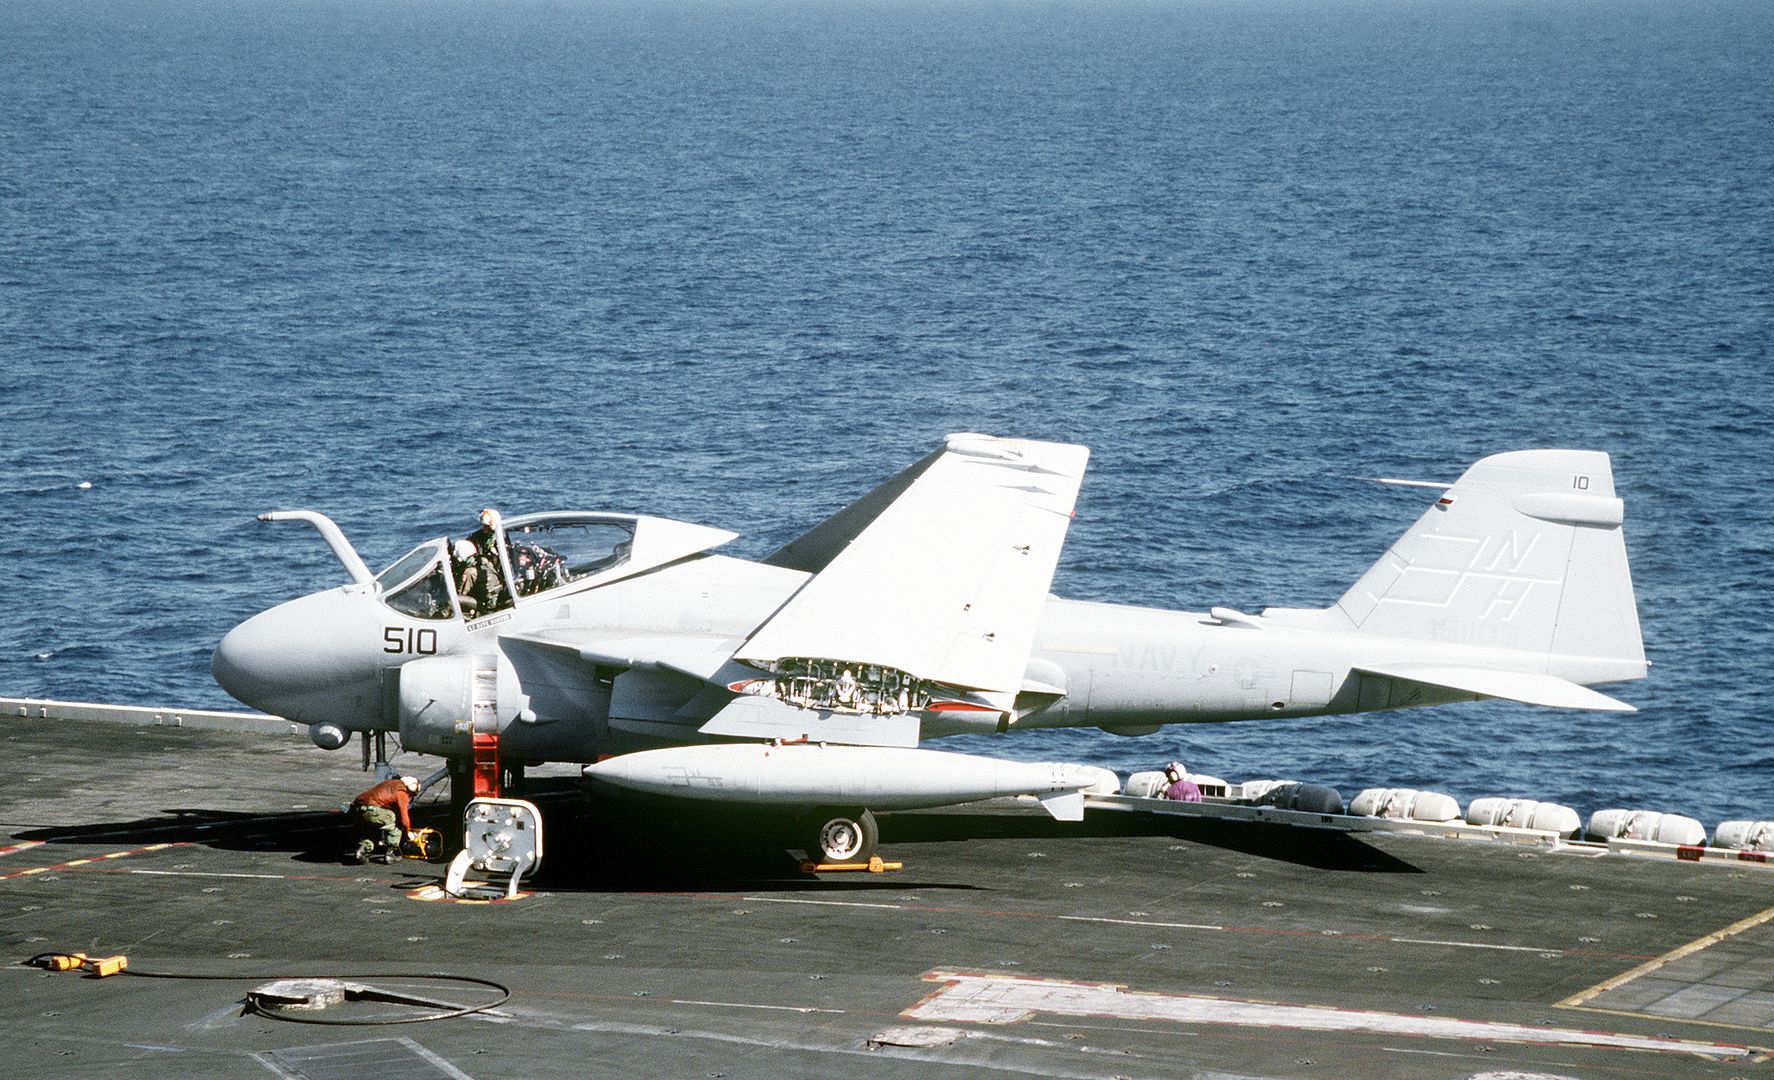 Attack Squadron 95 A 6E Intruder Aircraft On The Flight Deck Of The Nuclear Powered Aircraft Carrier USS ABRAHAM LINCOLN